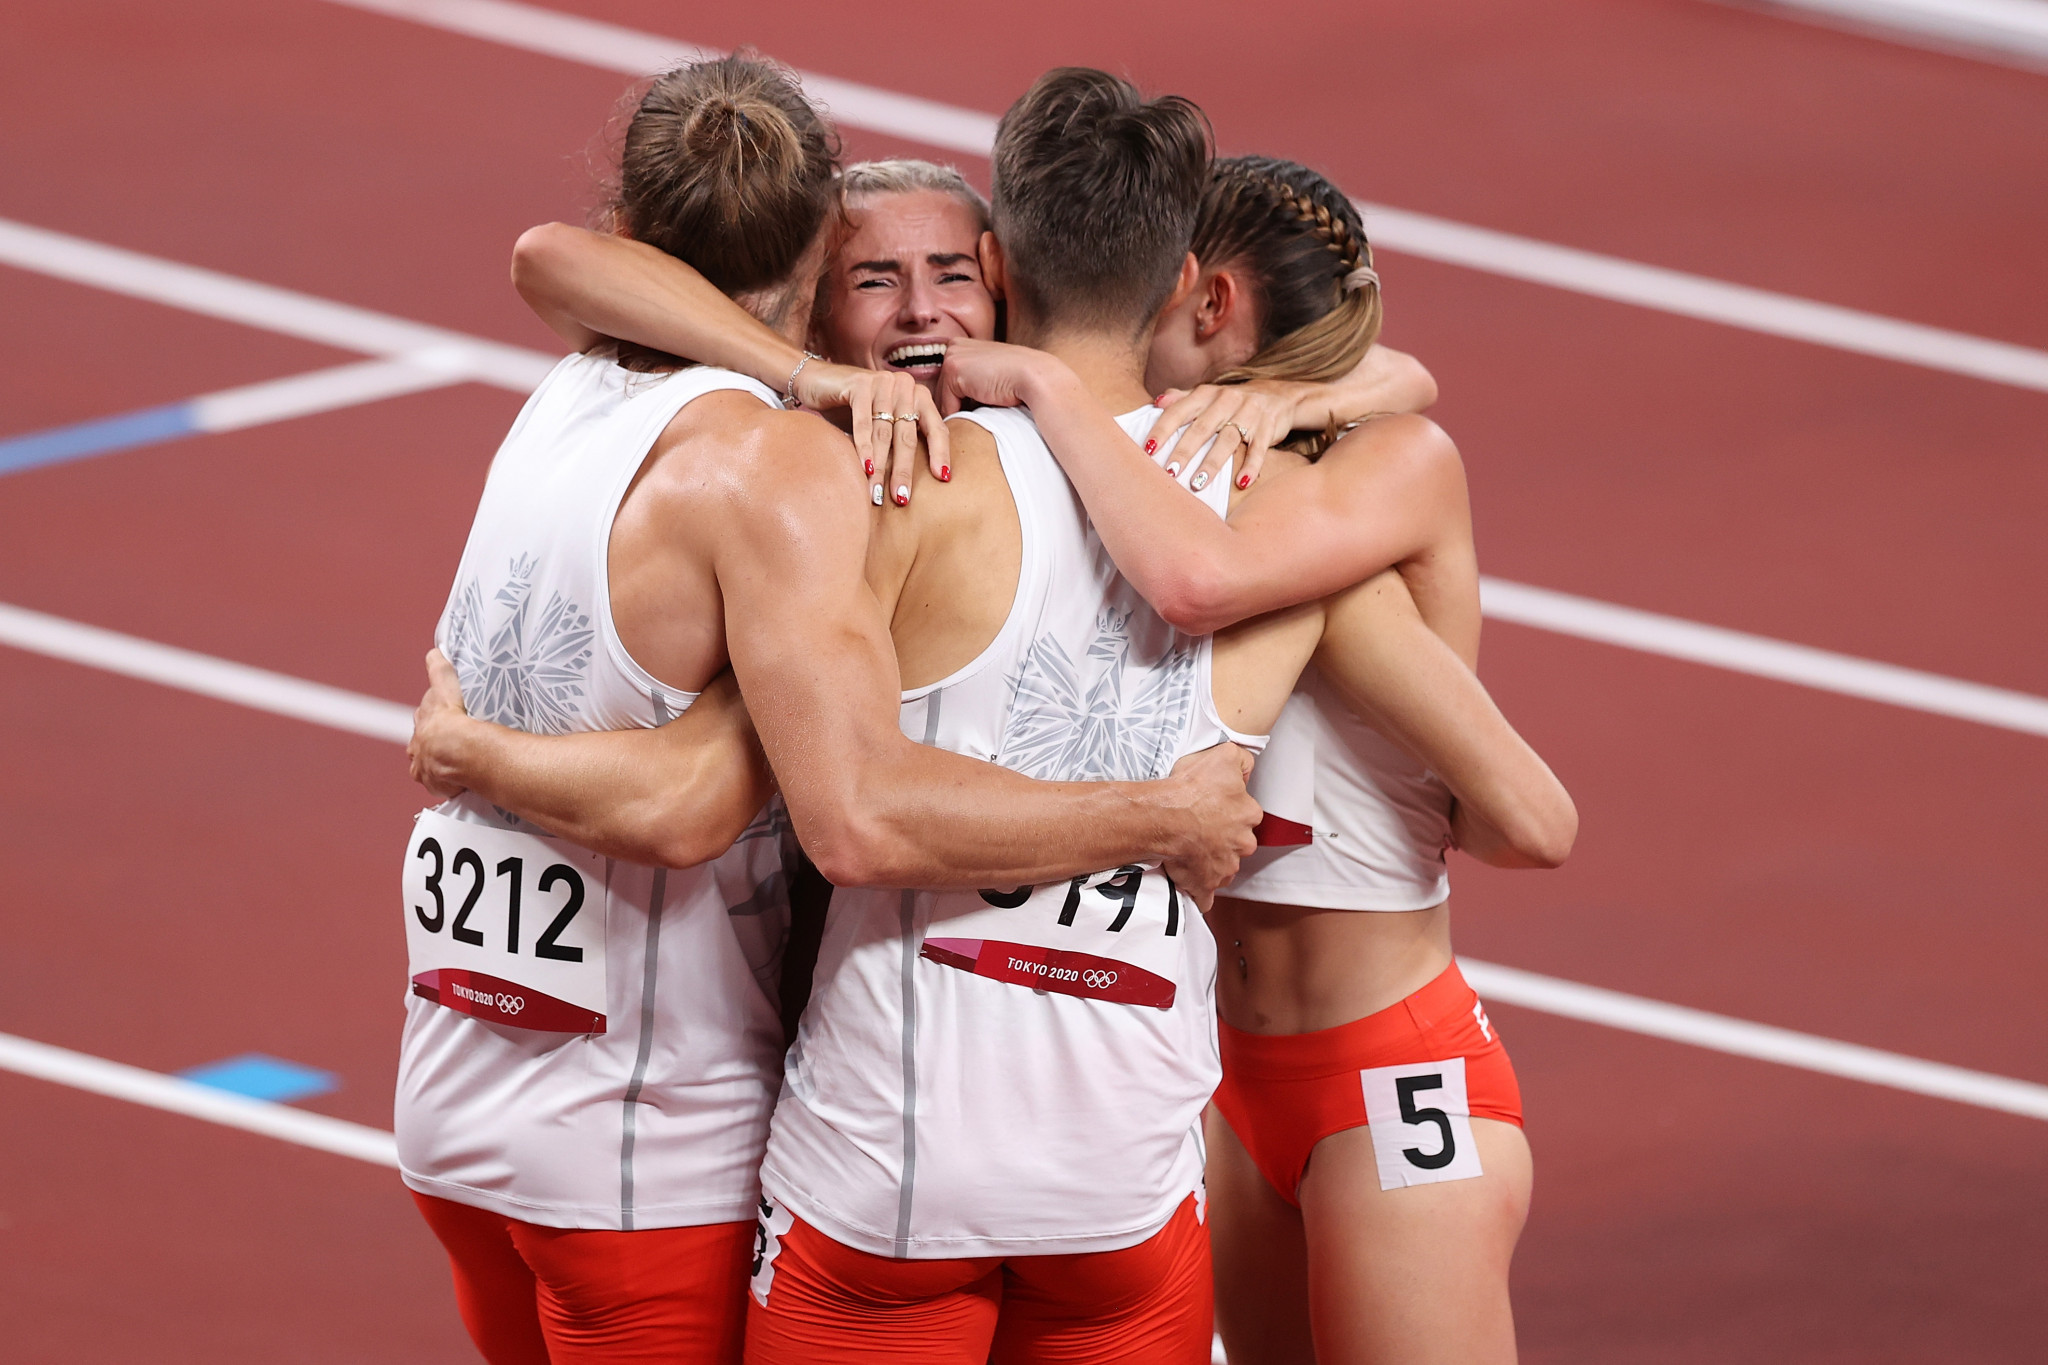 World Athletics claims to be on track for gender equality in Council by 2027